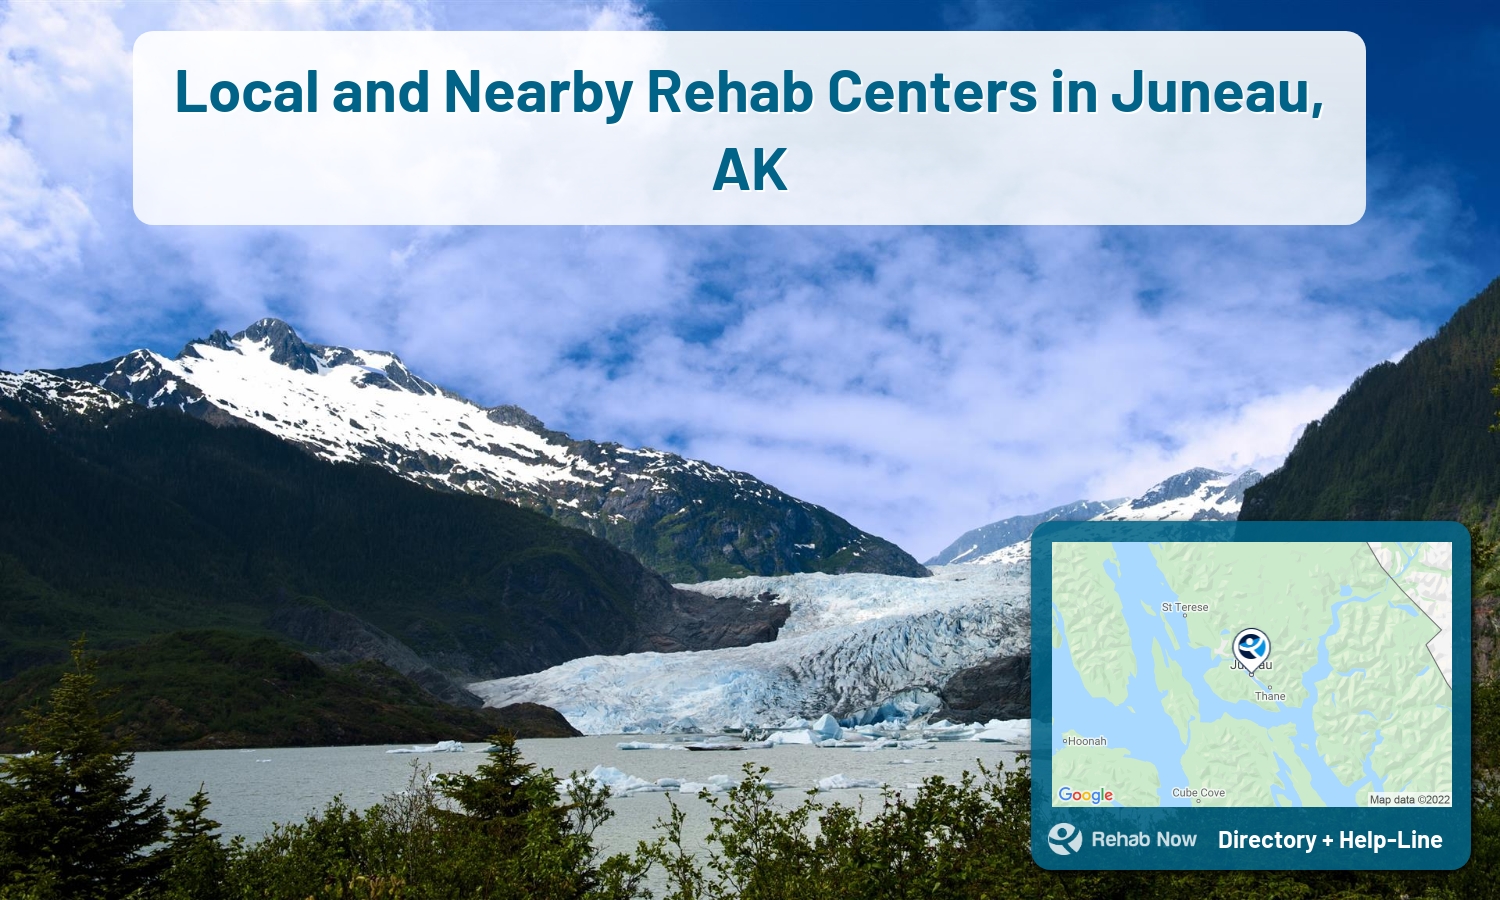 View options, availability, treatment methods, and more, for drug rehab and alcohol treatment in Juneau, Alaska